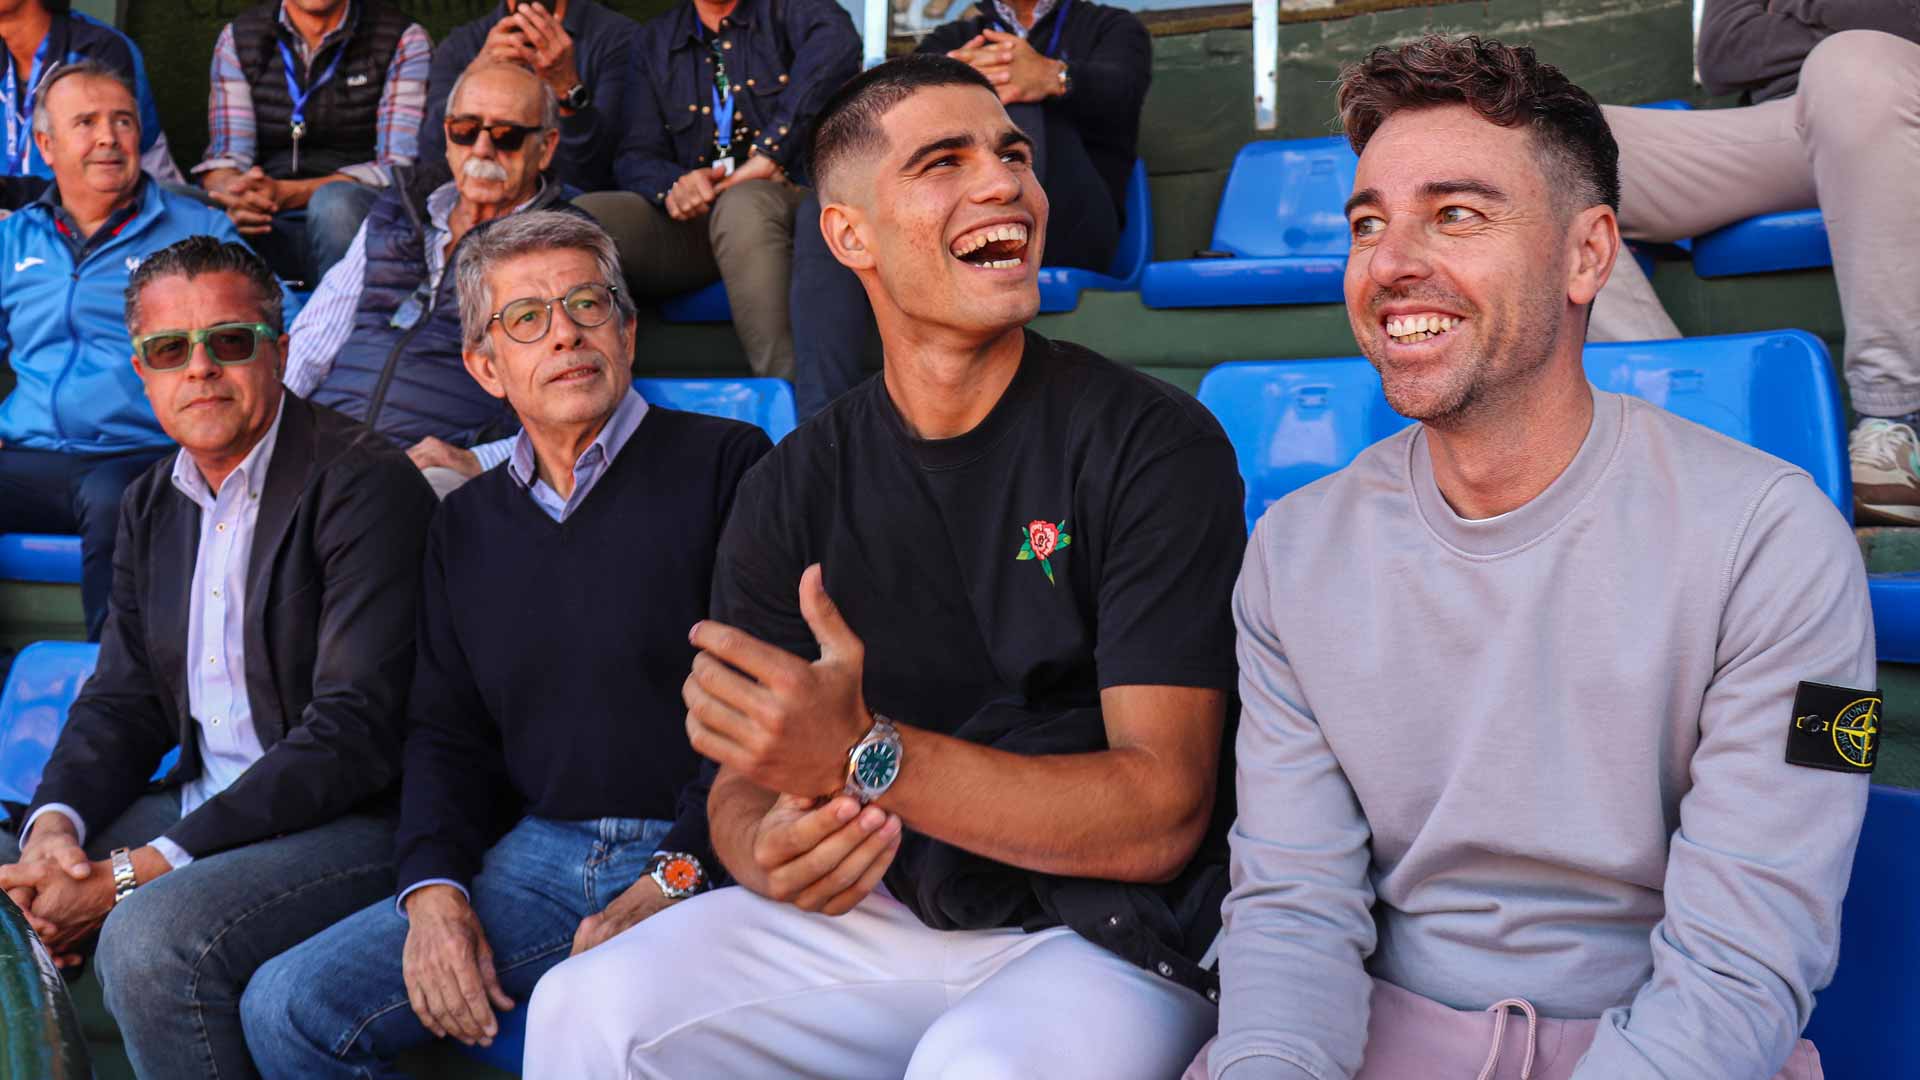 Carlos Alcaraz at the ATP Challenger Tour event in Murcia, Spain.